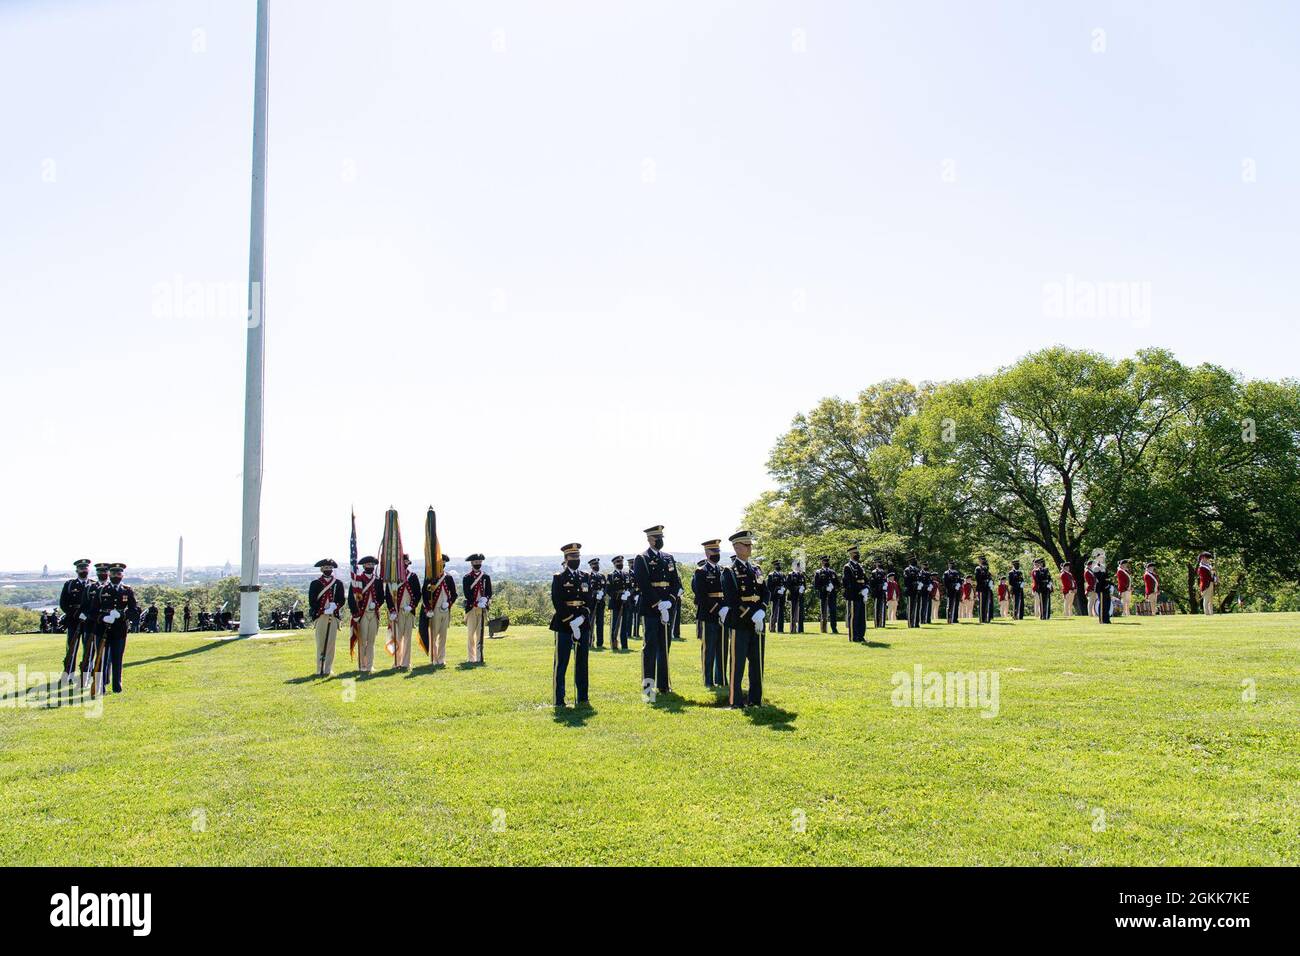 U.S. Soldiers assigned to the 3rd U.S. Infantry Regiment (The Old Guard) participate in an Army Full Honor Arrival Ceremony in honor of General Sir Mark Alexander Carleton-Smith, the chief of the General Staff of the British Army, at Whipple Field, Joint Base Myer-Henderson Hall, Arlington, Va., May 13, 2021.   Chief of Staff of the U.S. Army Gen. James C. McConville hosted the event. Stock Photo